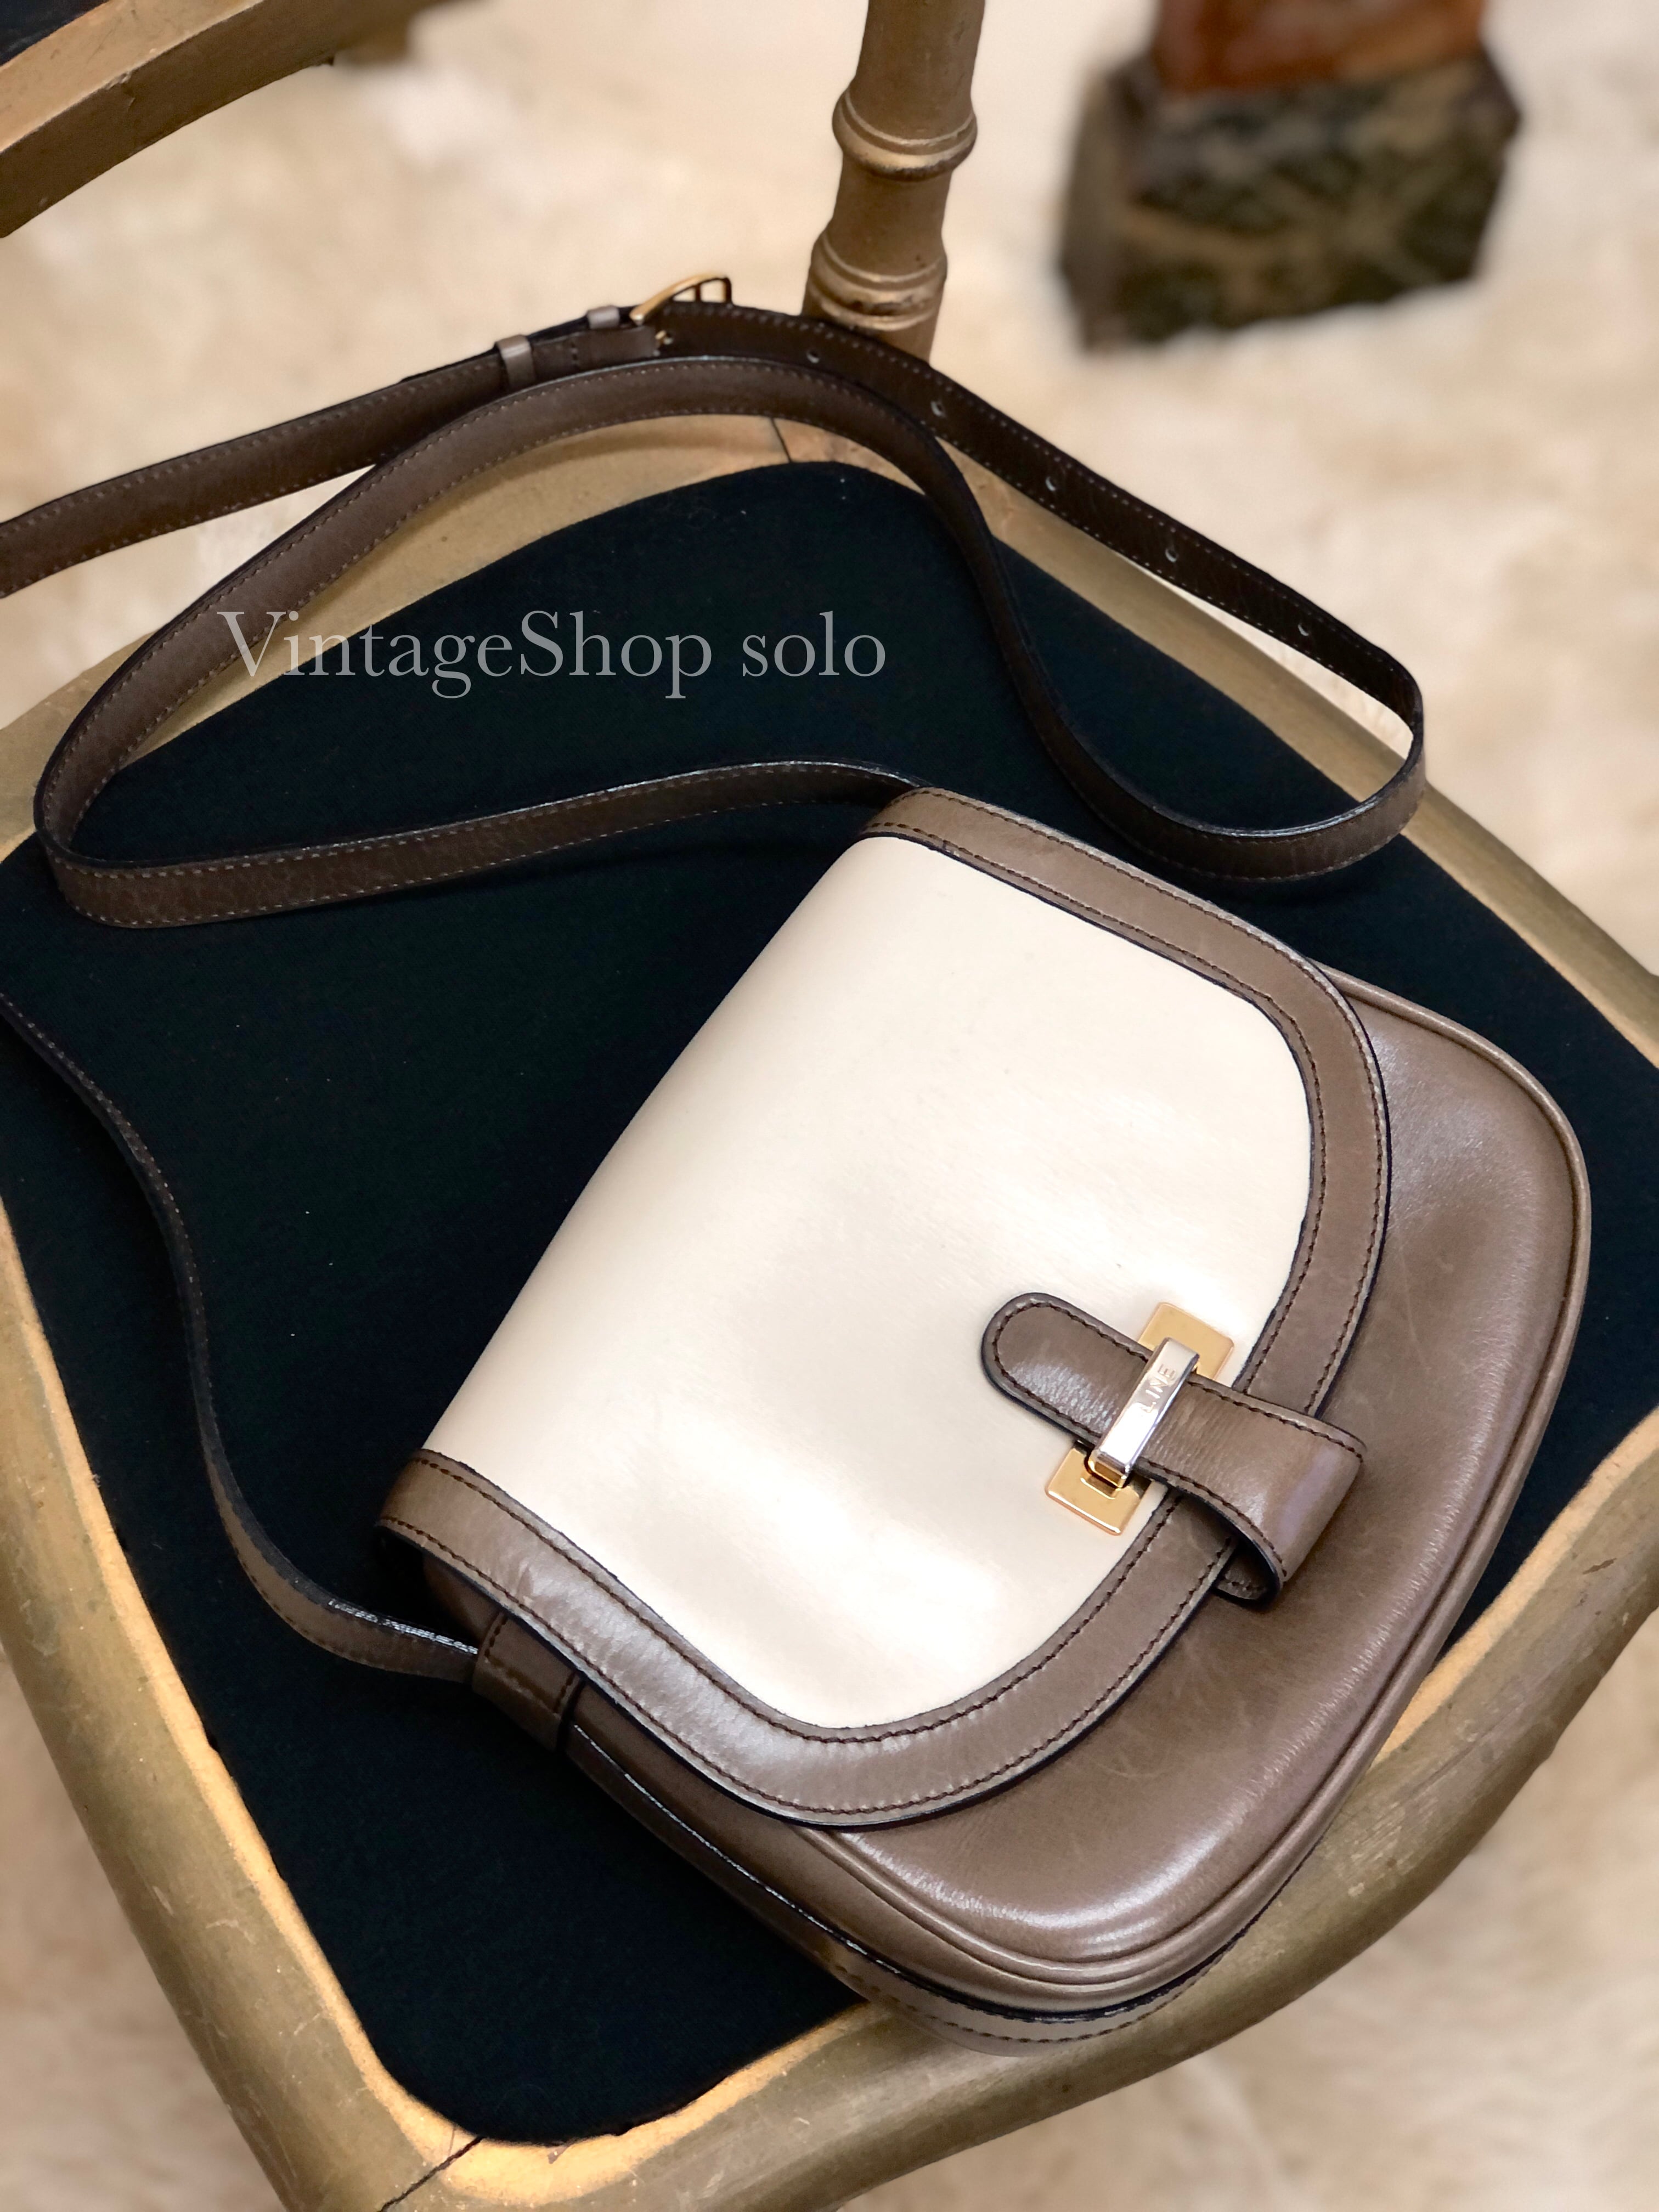 CELINE セリーヌ　フロントロック　ロゴ　レザー　バイカラー　ショルダーバッグ　ブラウン×ホワイト　vintage　ヴィンテージ　オールドセリーヌ　 d4xrie | VintageShop solo powered by BASE